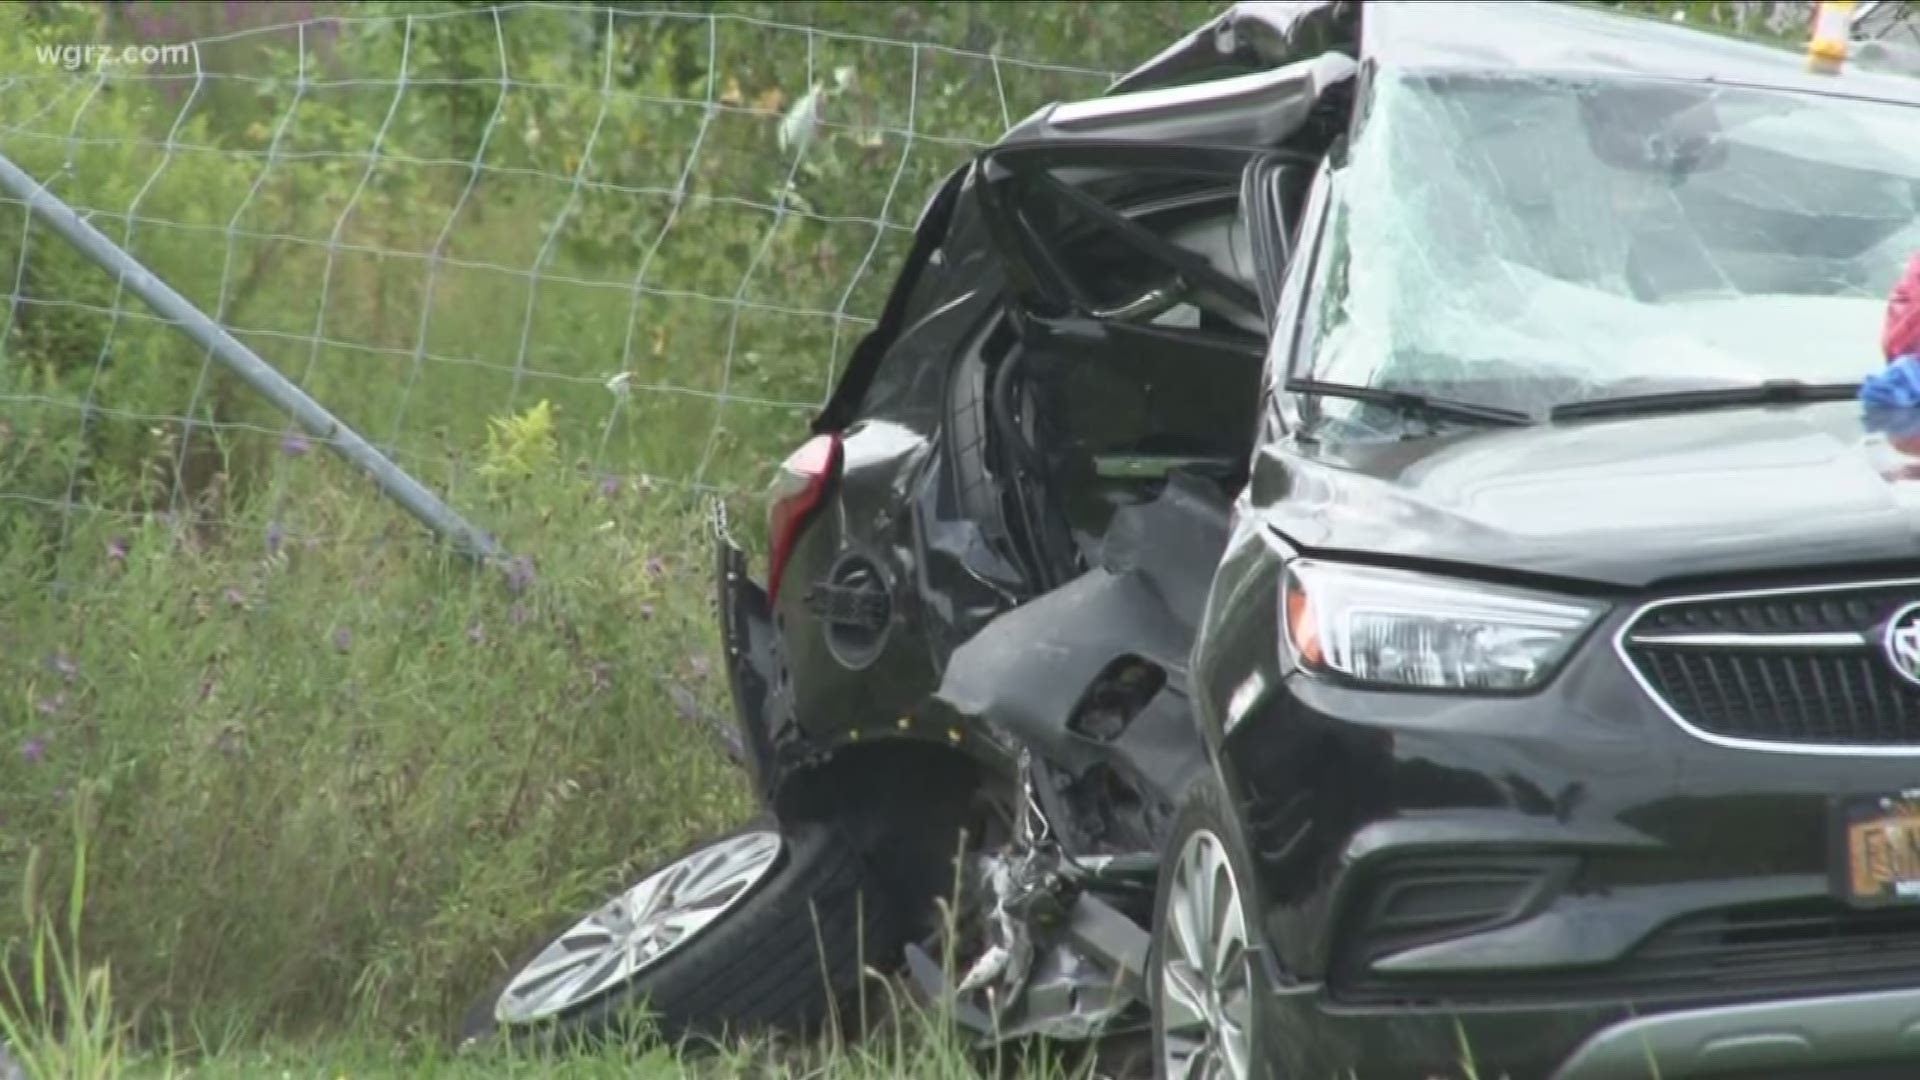 At least one person has died after a crash in the town of Darien, in Genesee county.